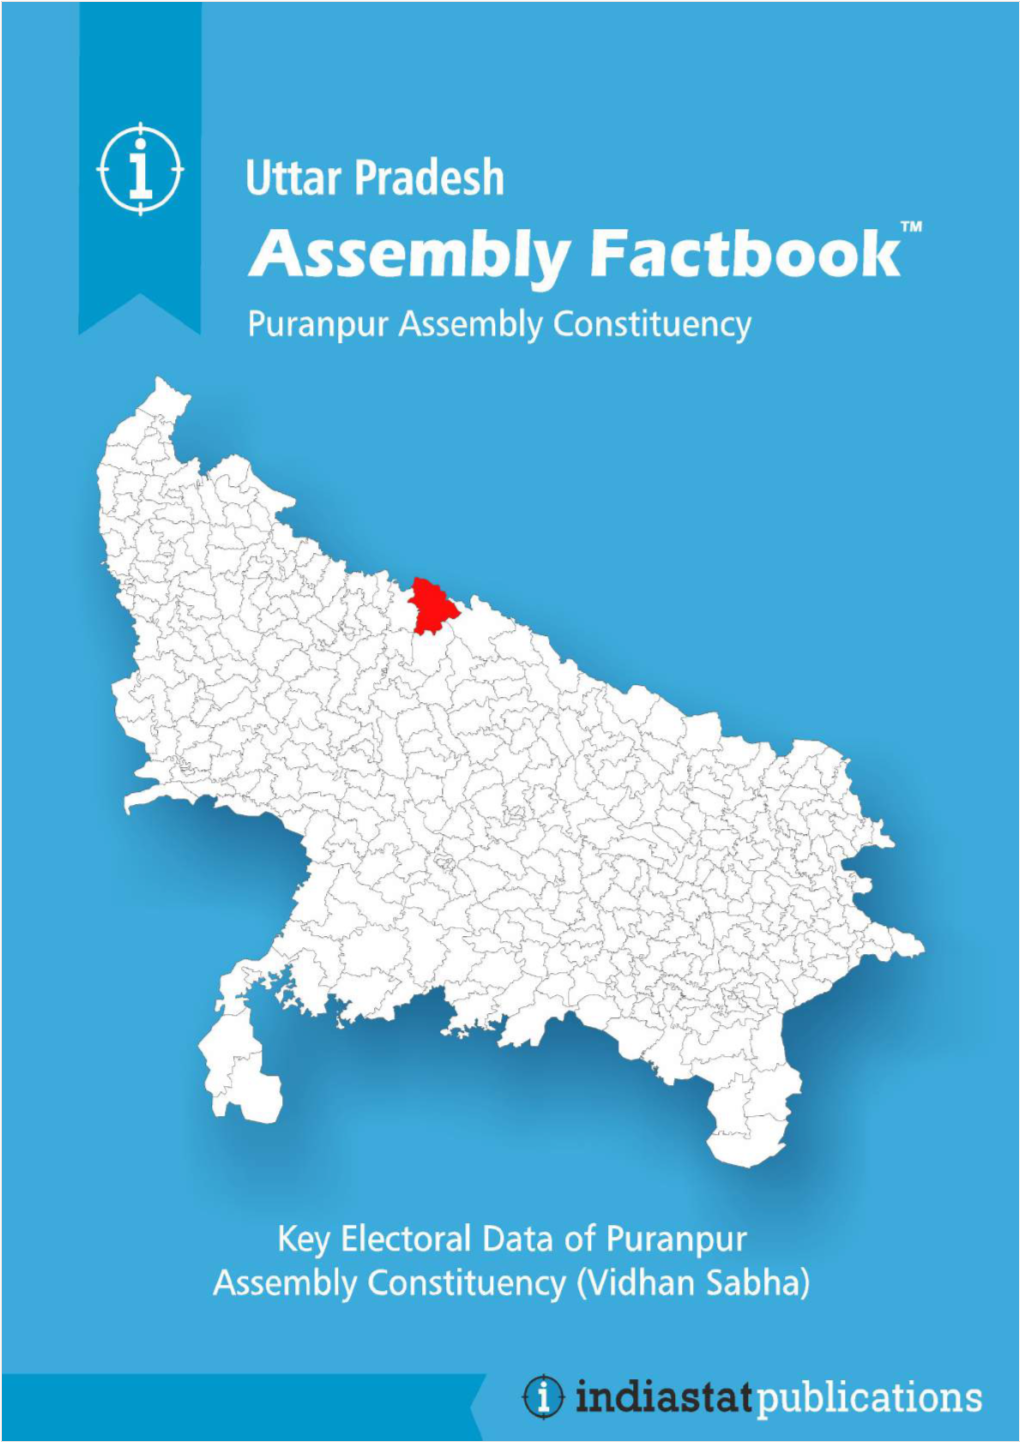 Puranpur Assembly Uttar Pradesh Factbook | Key Electoral Data of Puranpur Assembly Constituency | Sample Book